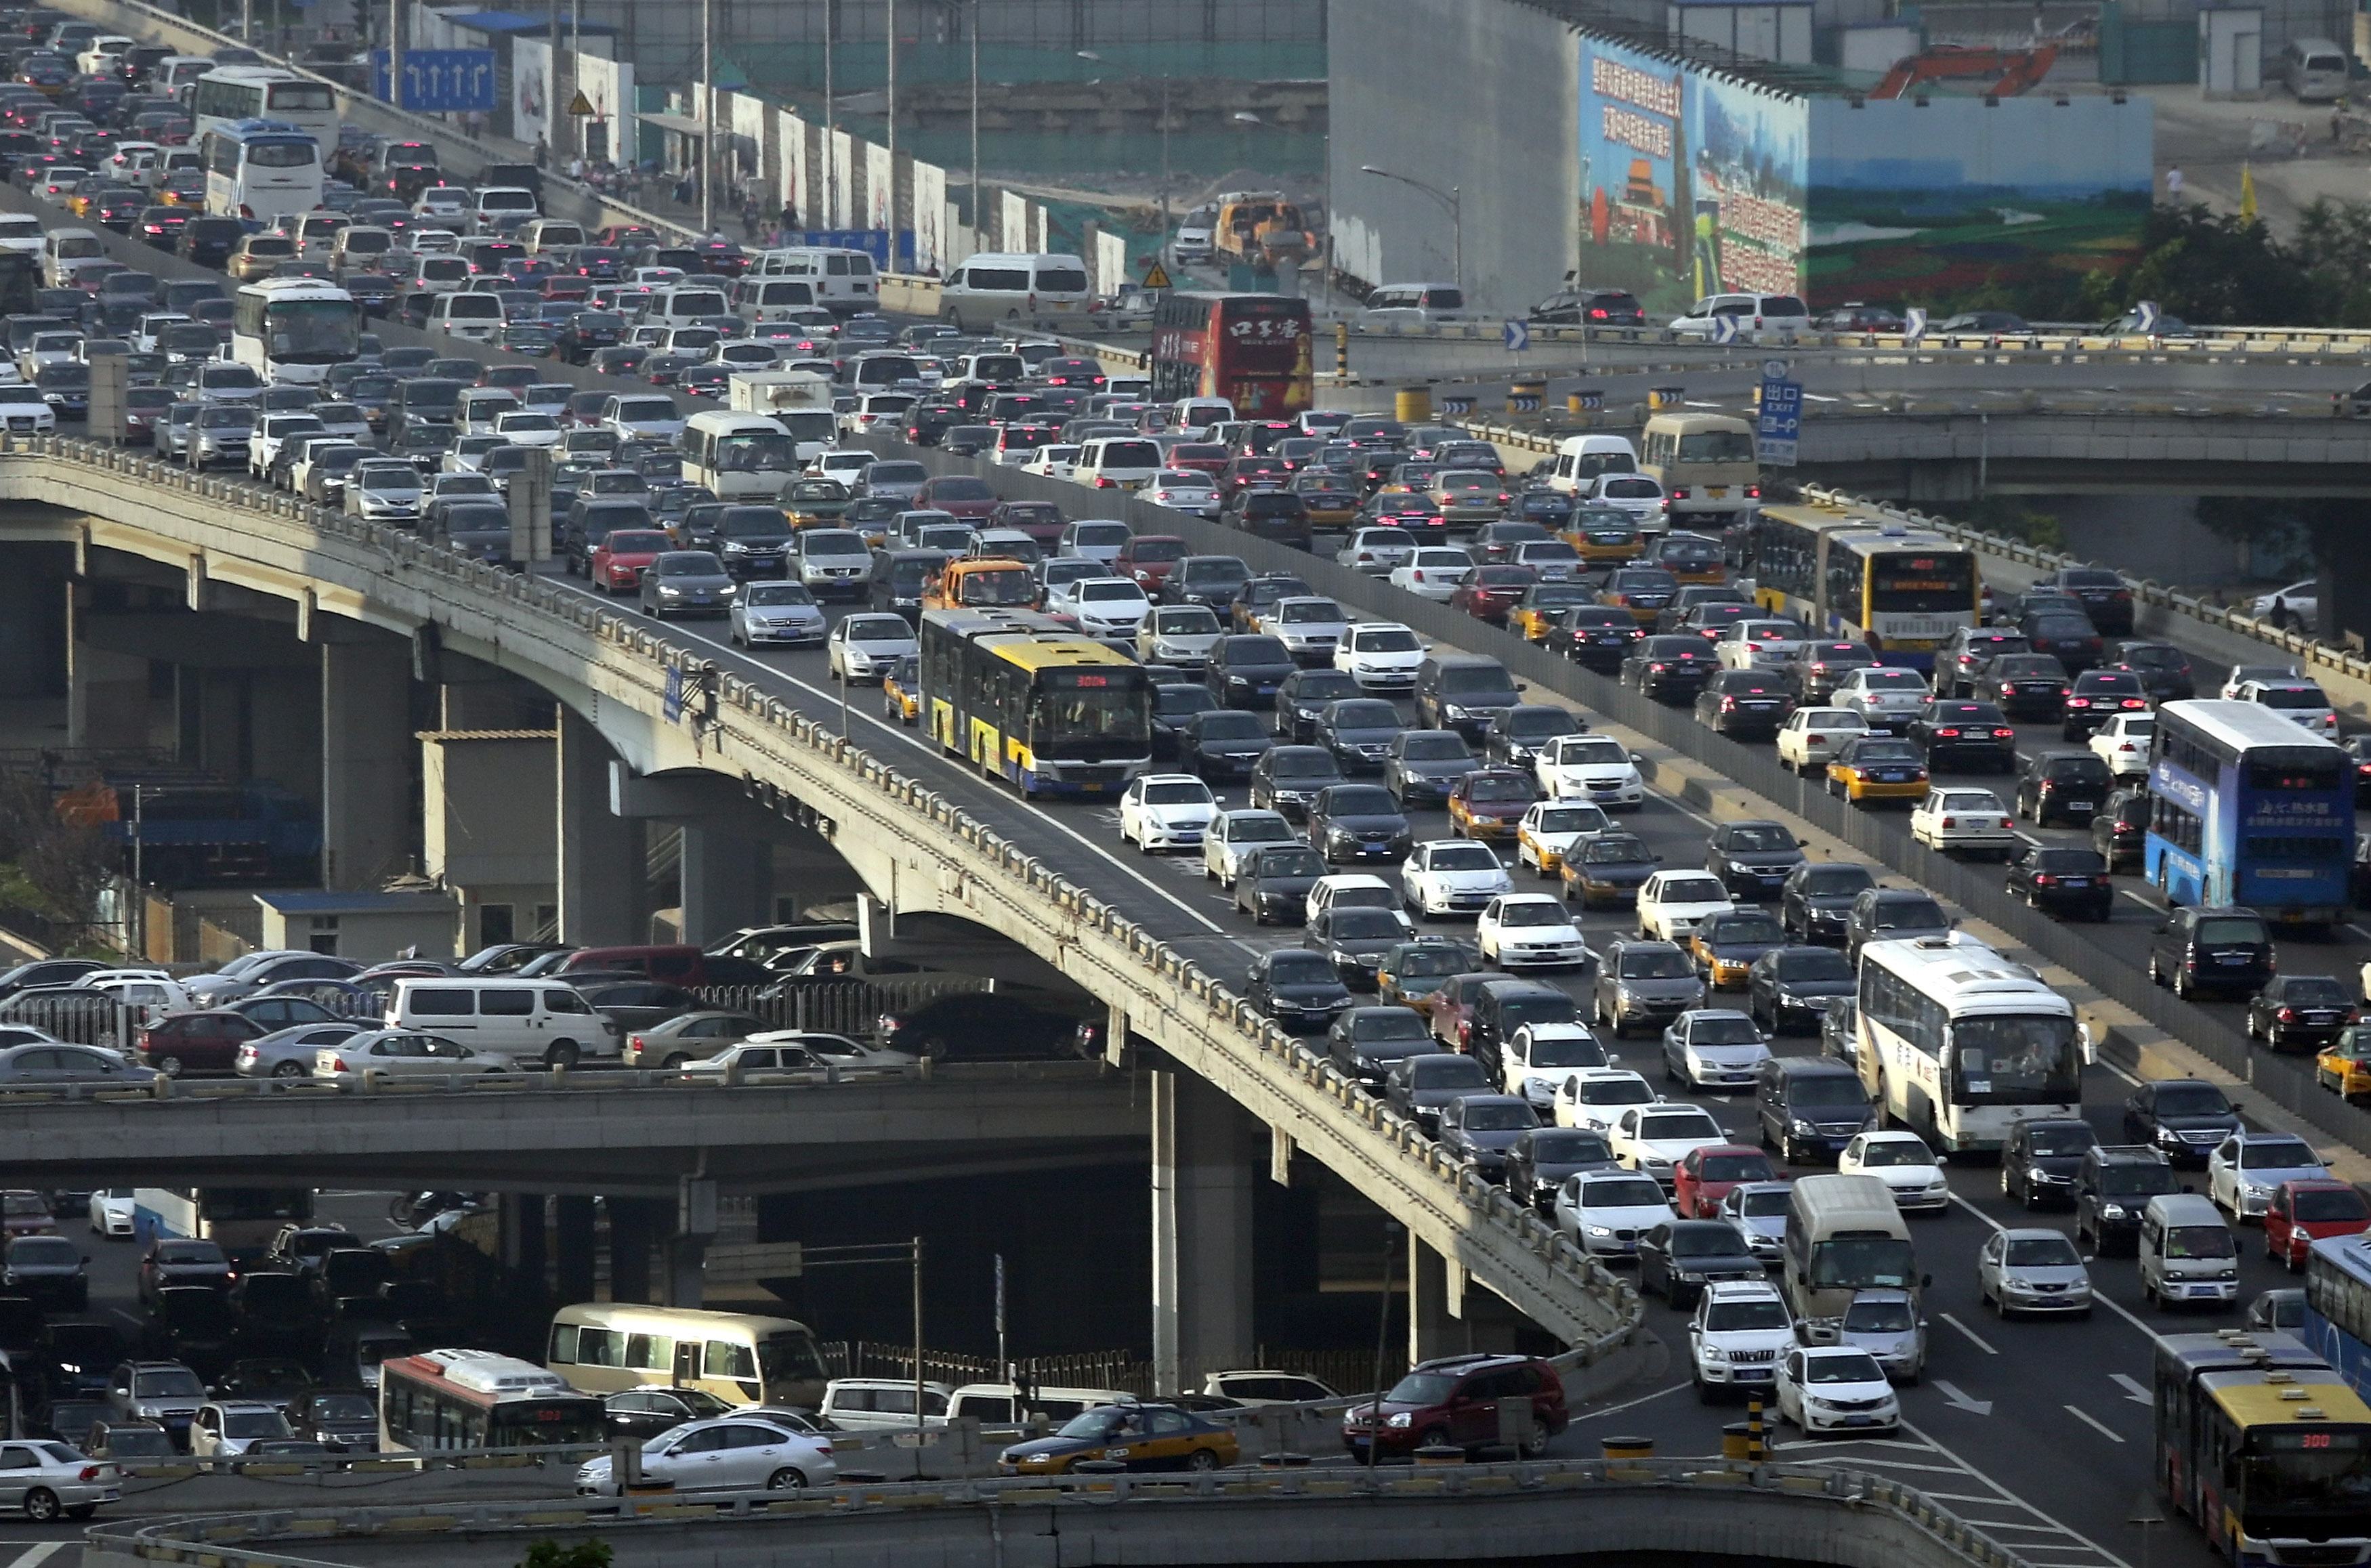 Lines of cars are pictured during a rush hour traffic jam on Guomao Bridge in Beijing July 11, 2013. Eight more cities in China, the world's biggest auto market, are likely to announce policies restricting new vehicle purchases, an official at the automakers association said, as Beijing tries to control air pollution. REUTERS/Jason Lee (CHINA - Tags: TRANSPORT ENVIRONMENT BUSINESS TPX IMAGES OF THE DAY)